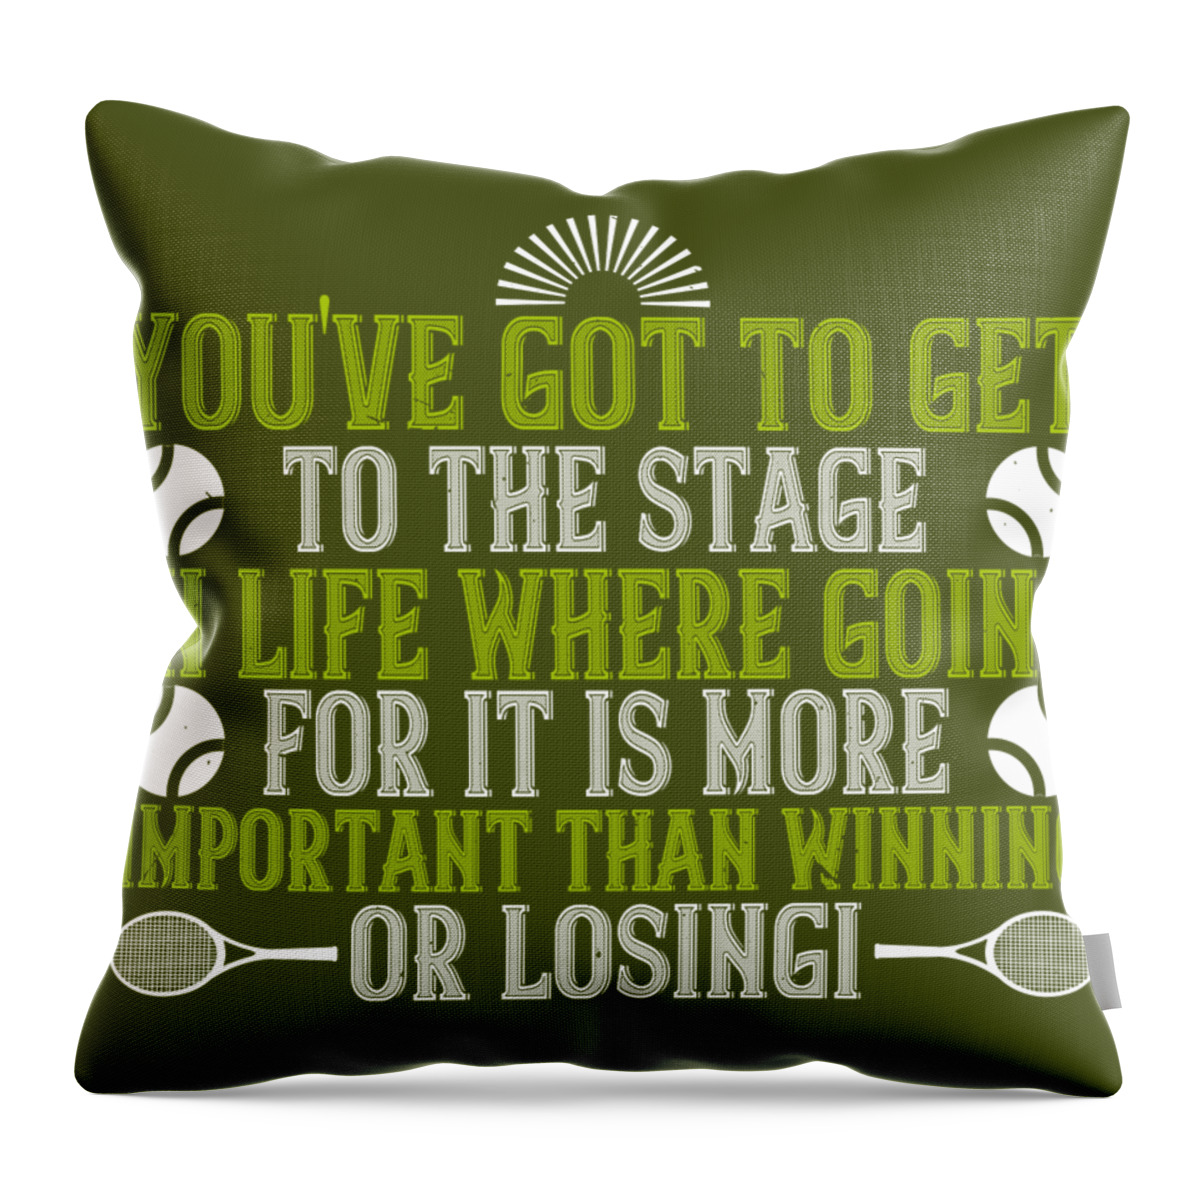 Tennis Throw Pillow featuring the digital art Tennis Player Gift You've Got To Get To The Stage In Life Where Going For It Is More by Jeff Creation